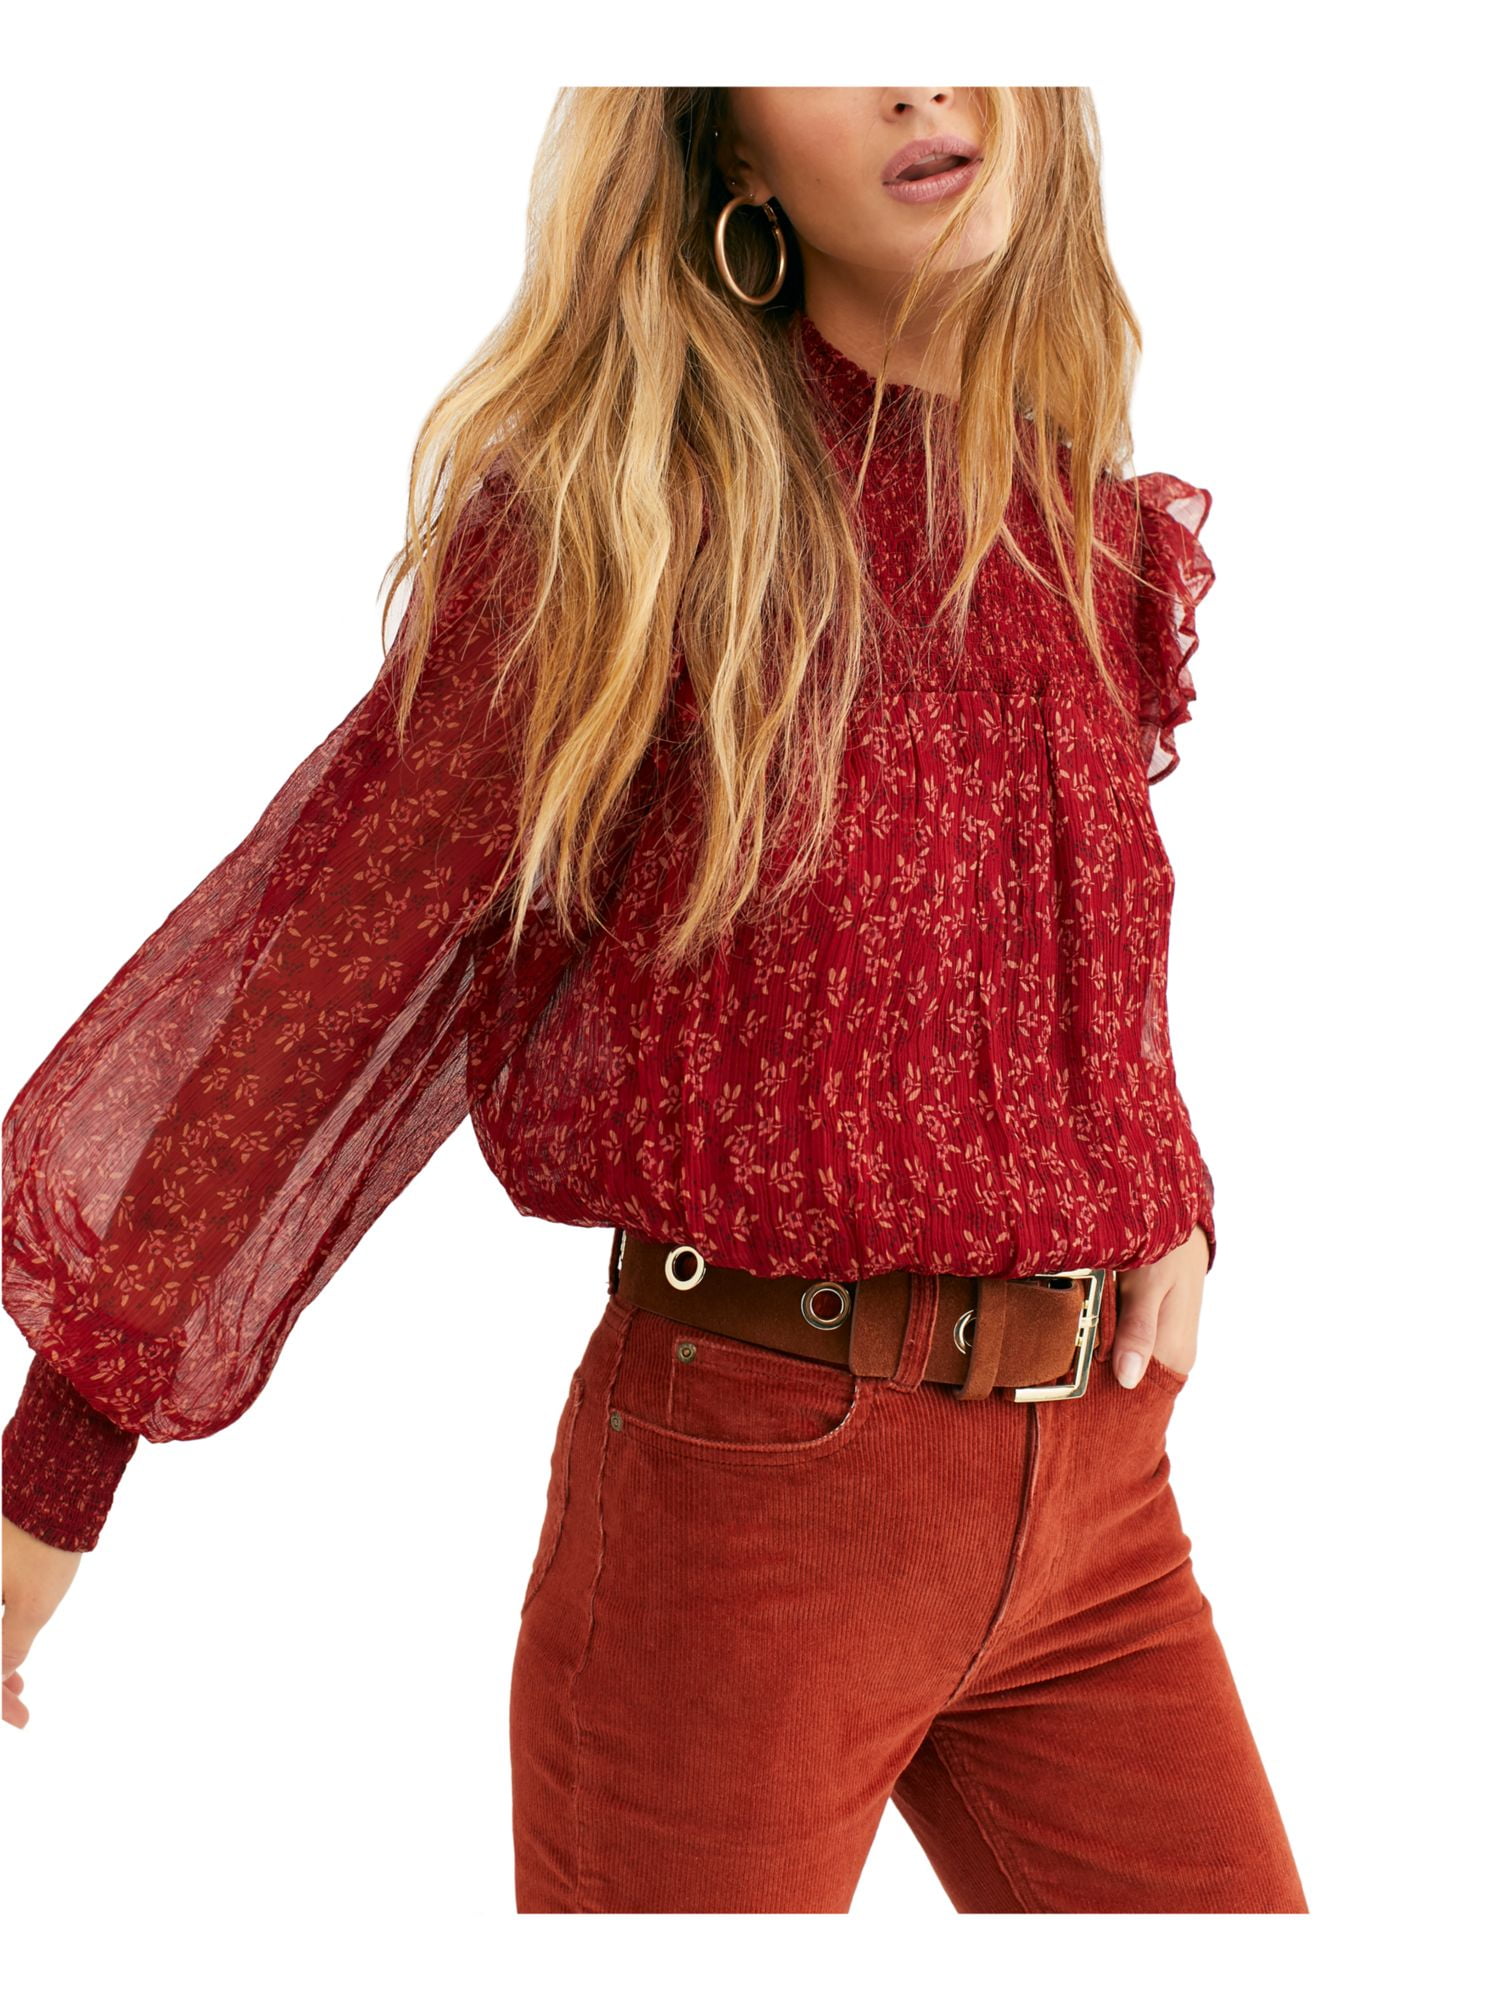 FREE PEOPLE Sheer Top Size: Sleeve Printed Womens Neck Mock S Long Red